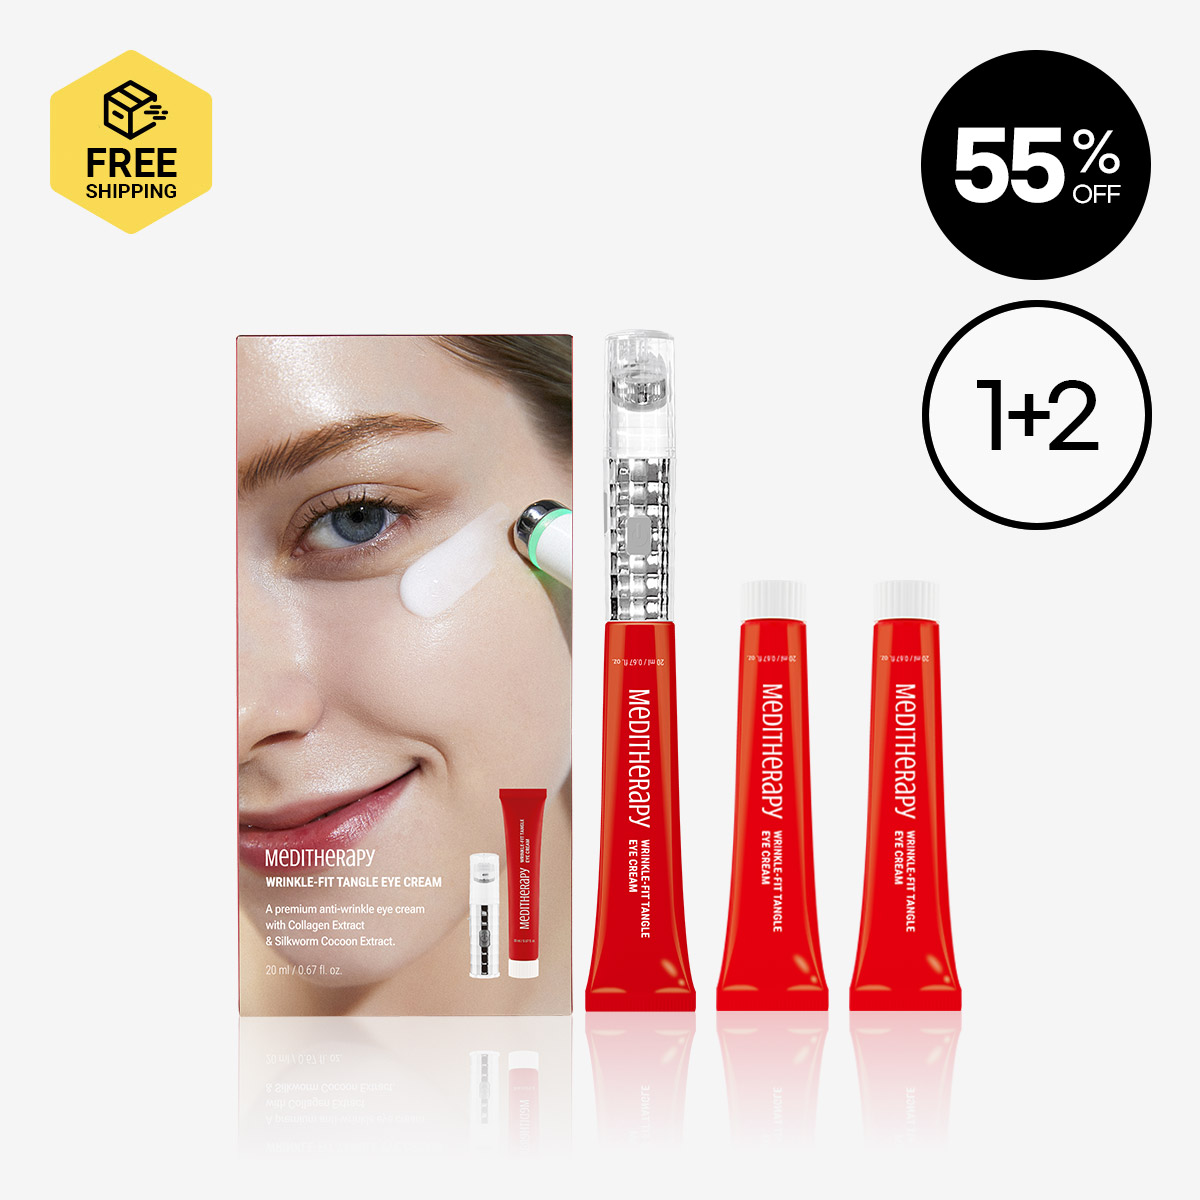 [MEDITHERAPY] Wrinkle-Fit Tangle Eye Cream 1 + Refill 2